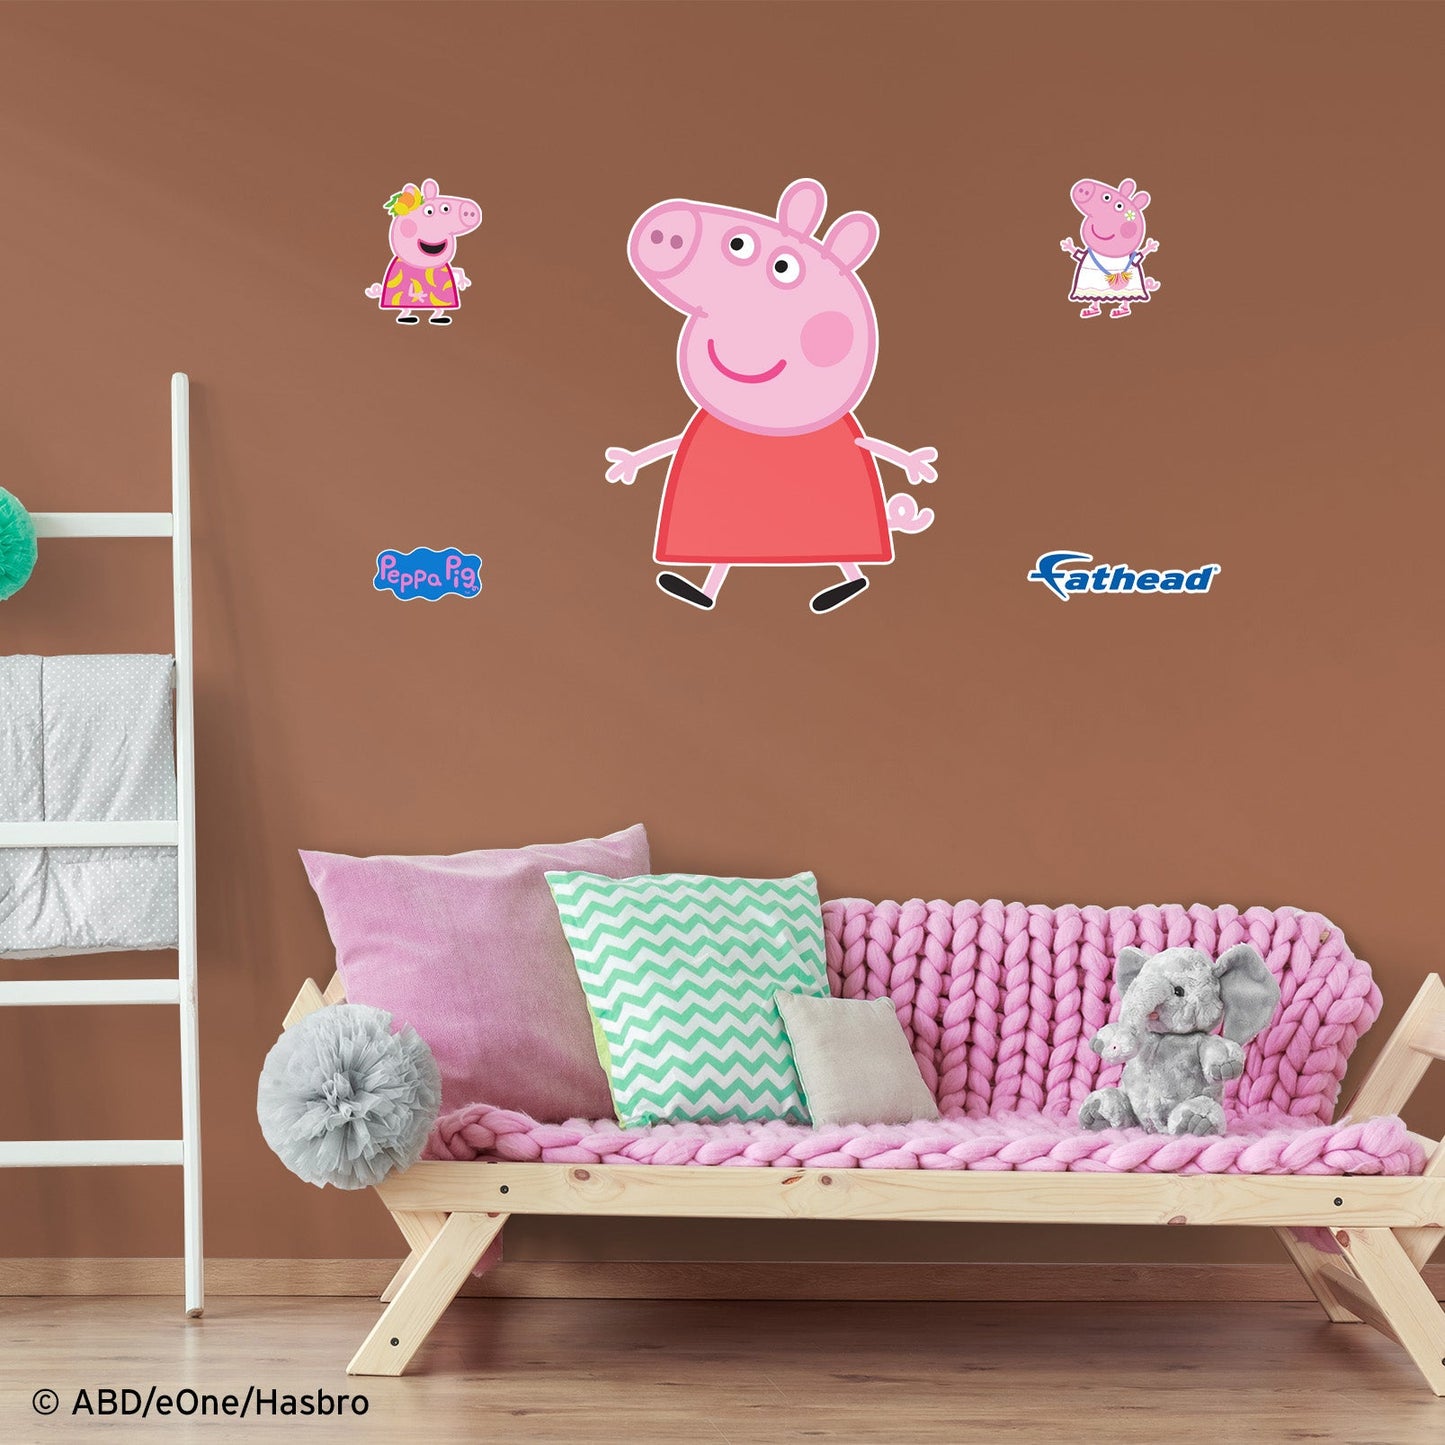 Peppa Pig: Peppa RealBigs - Officially Licensed Hasbro Removable Adhesive Decal